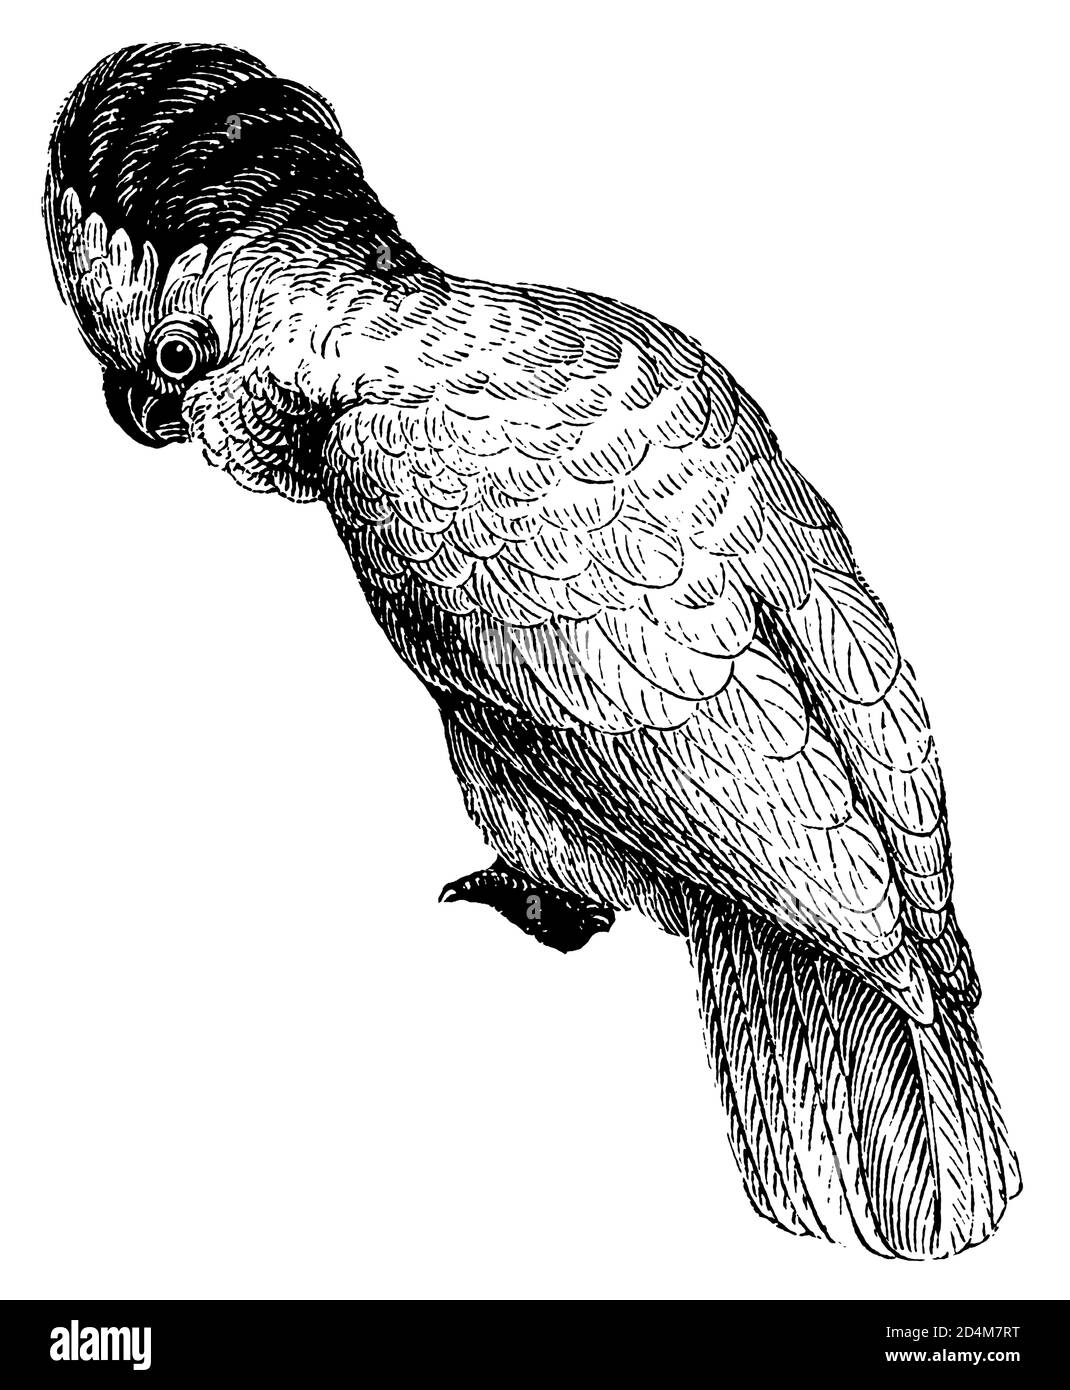 Vintage bird engraving of a cockatoo parrot (isolated on white). Published in Systematischer Bilder-Atlas zum Conversations-Lexikon Stock Photo